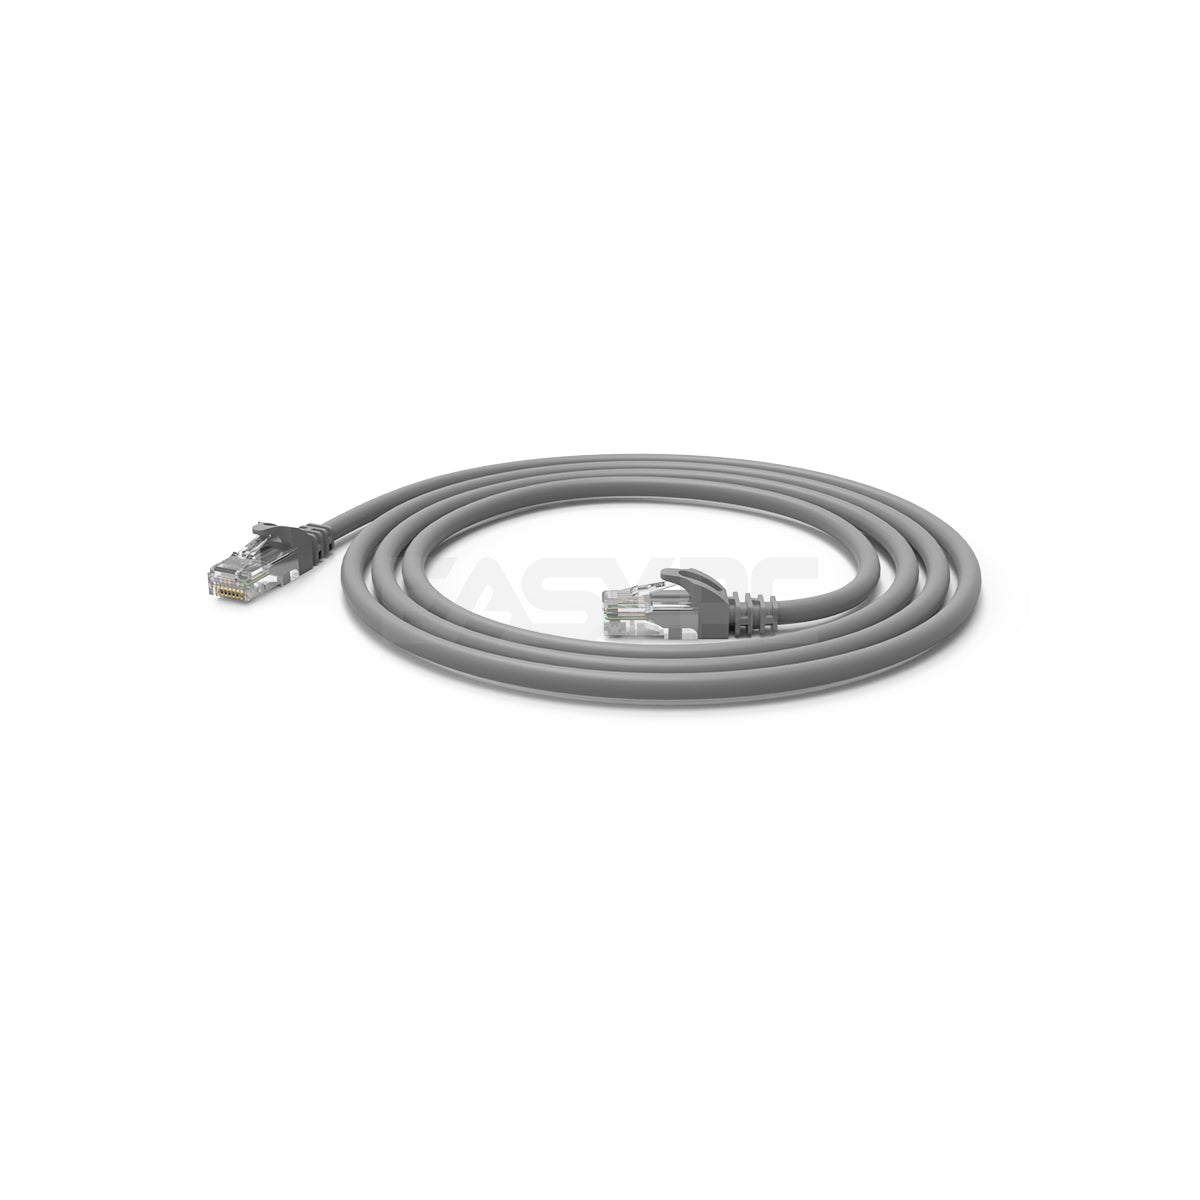 Ad-Link Ethernet Cable 10-Meters Cat5 Light Weight Convenient to Use Patch Cable Gray